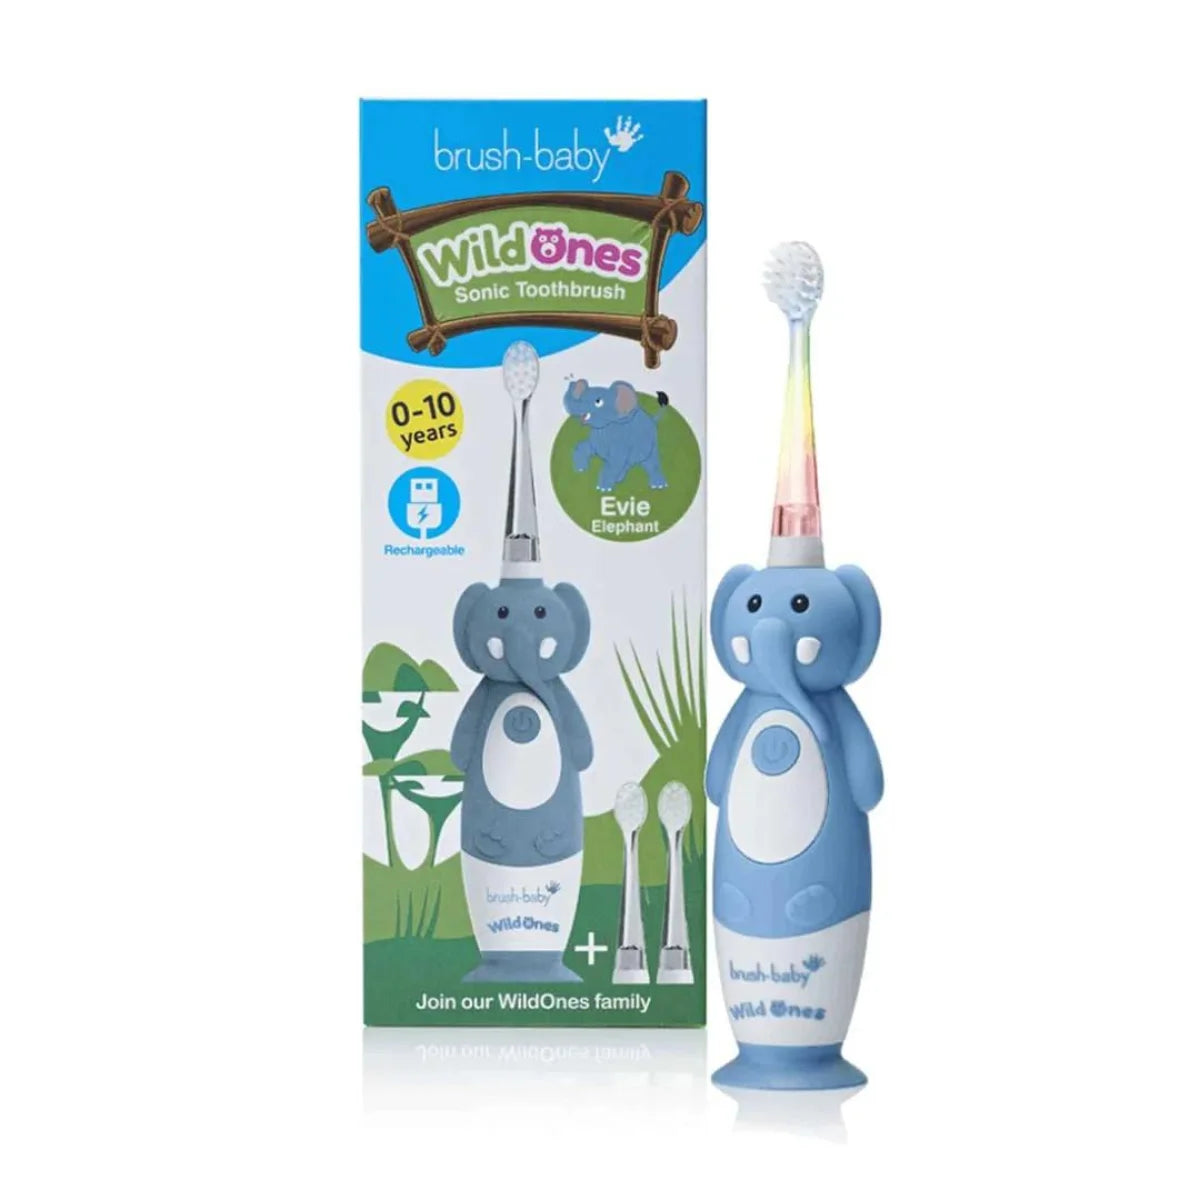 Blue and White WildOnes Evie Elephant electric Toothbrush for kids with flashing lights